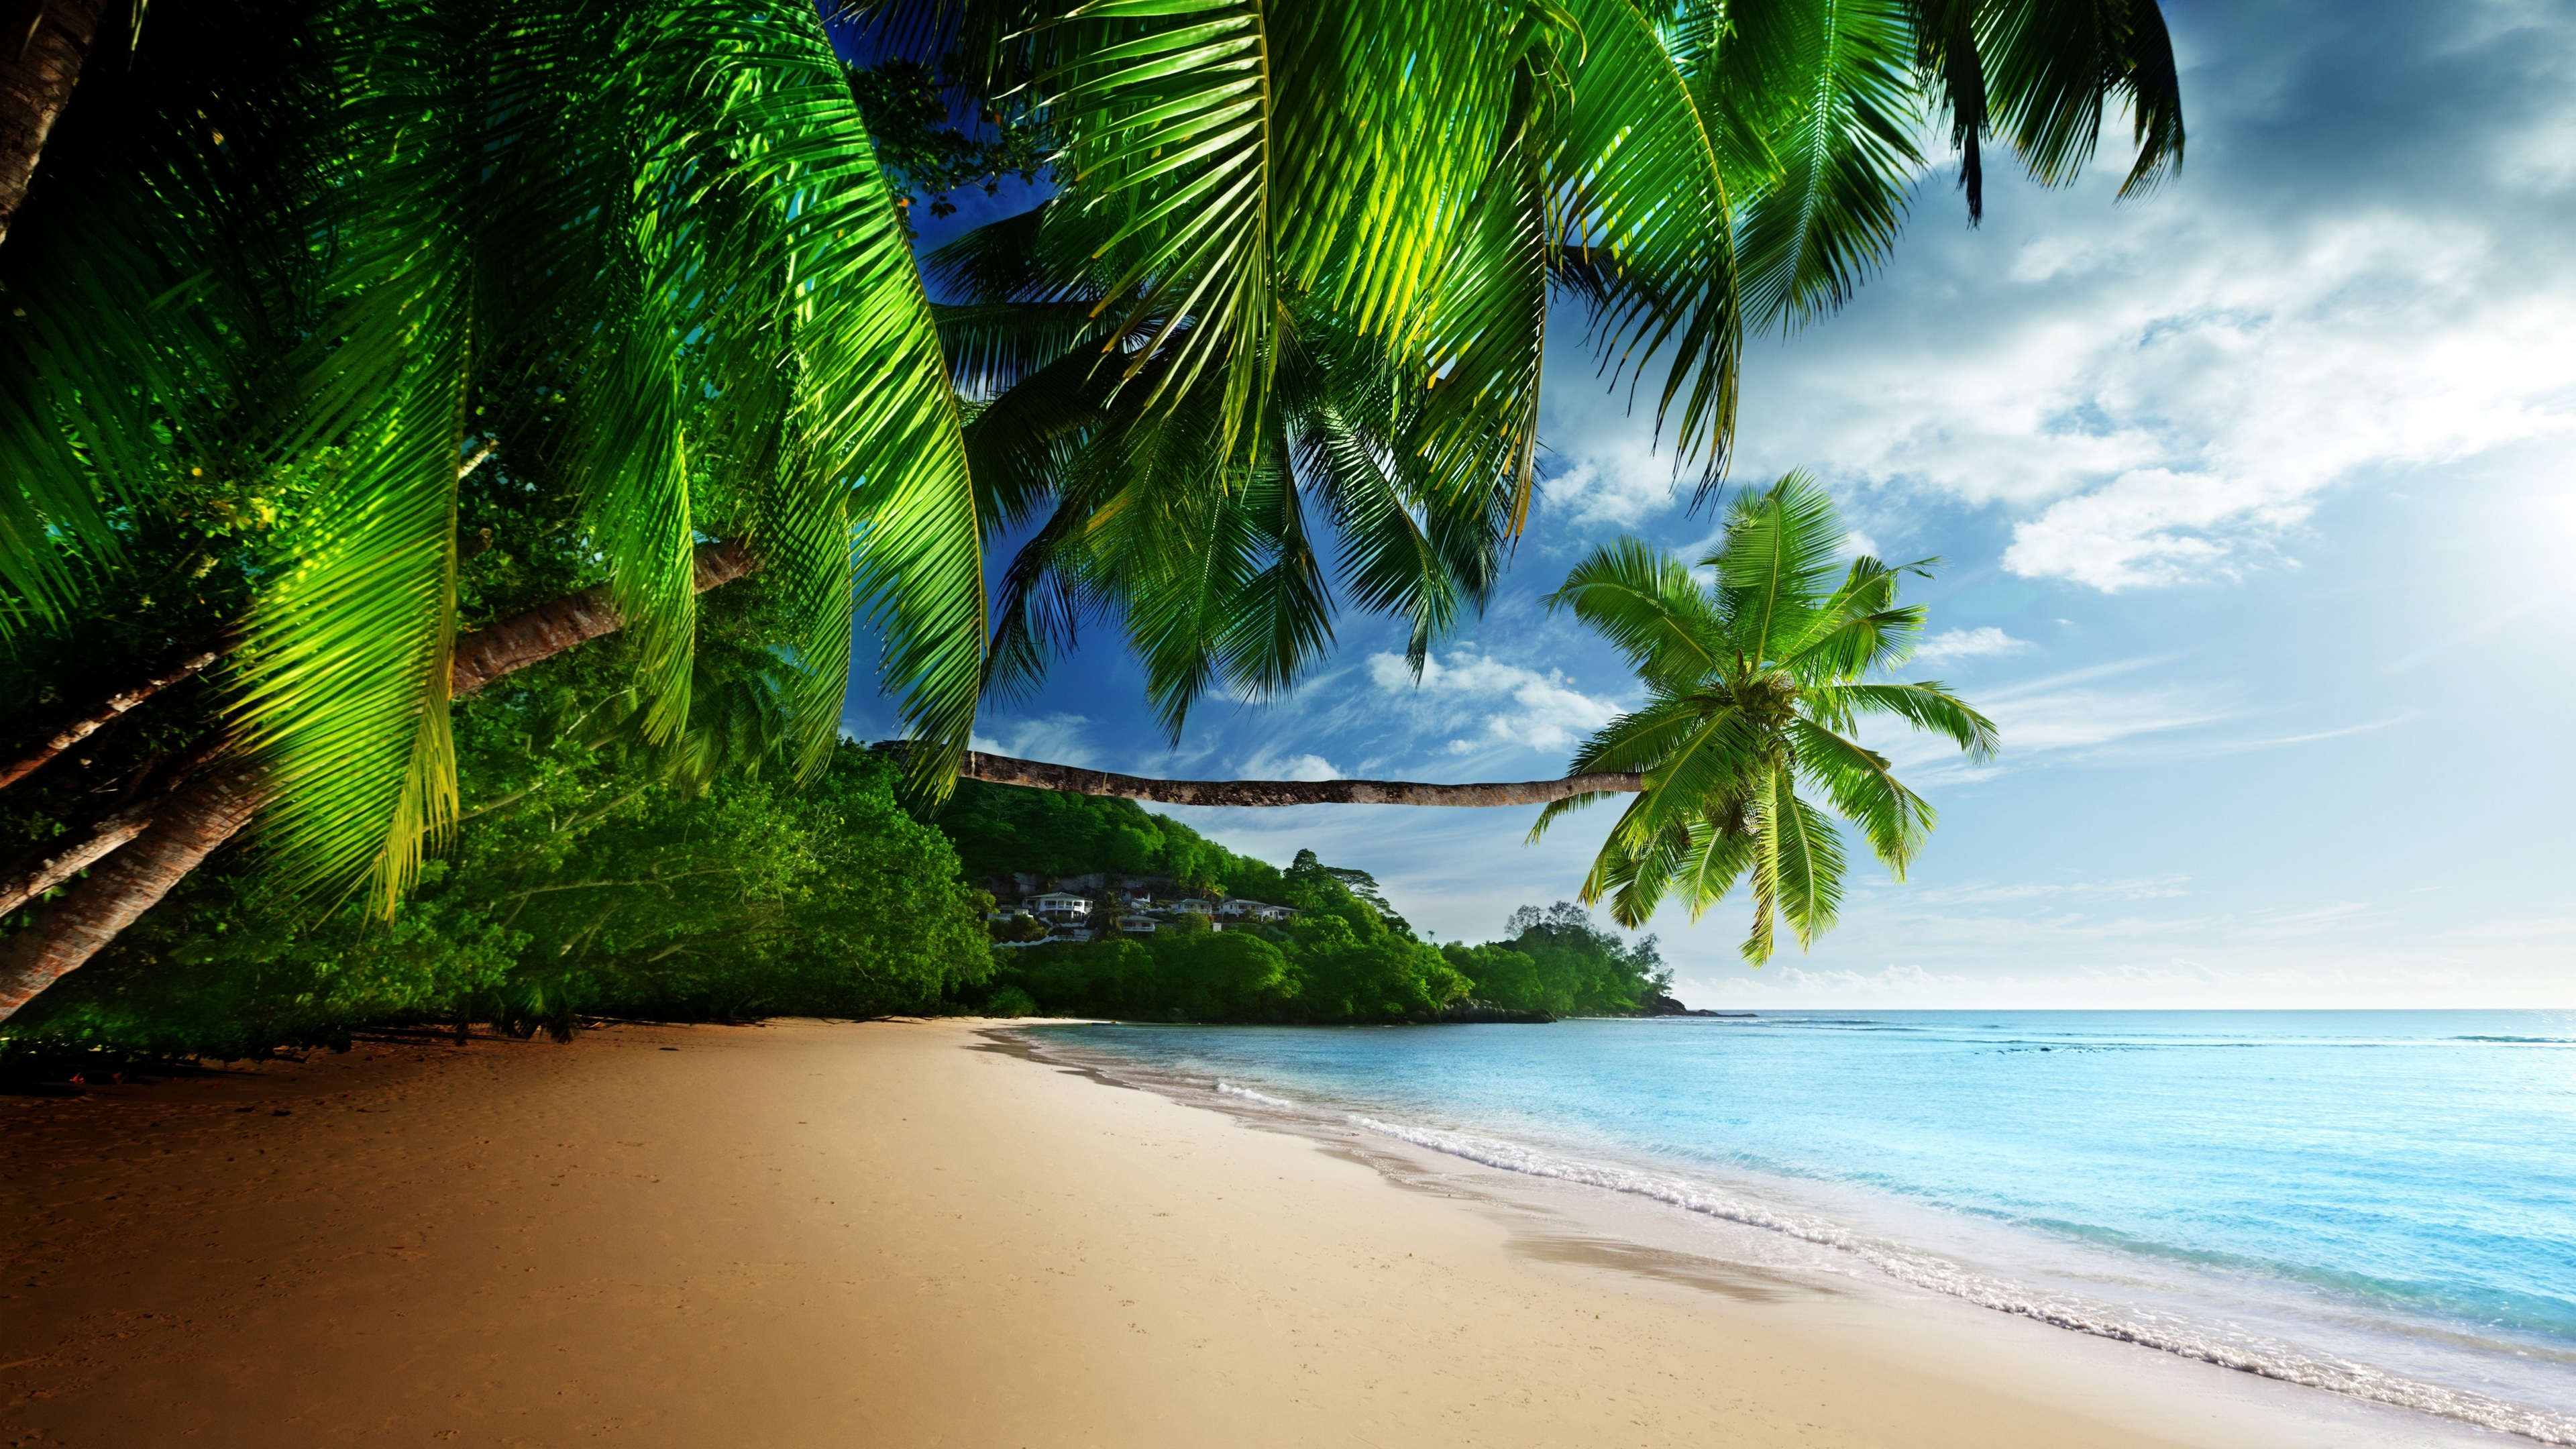 General 3840x2160 nature beach palm trees plants water sand leaves